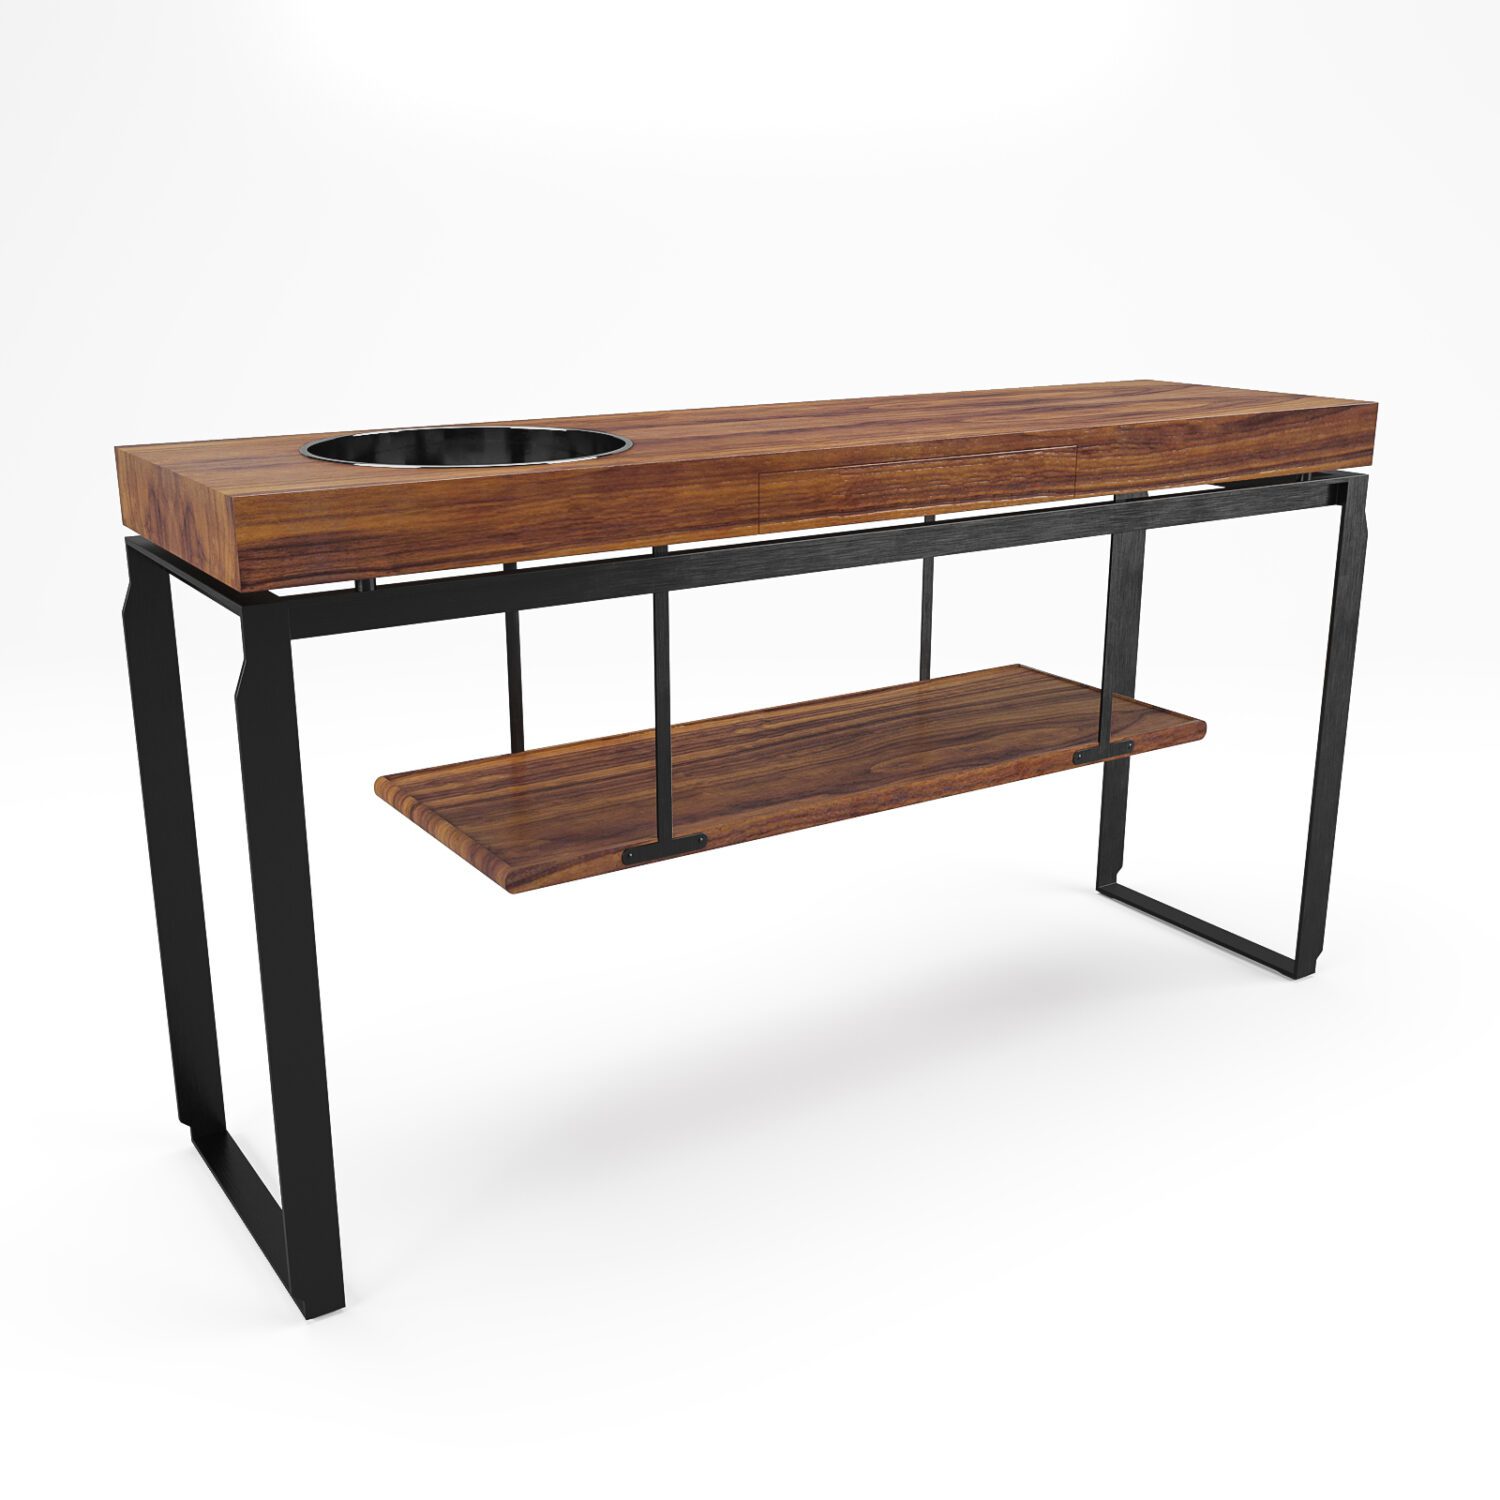 11158. Download Free 3D Console Table Model By Giang Hoang